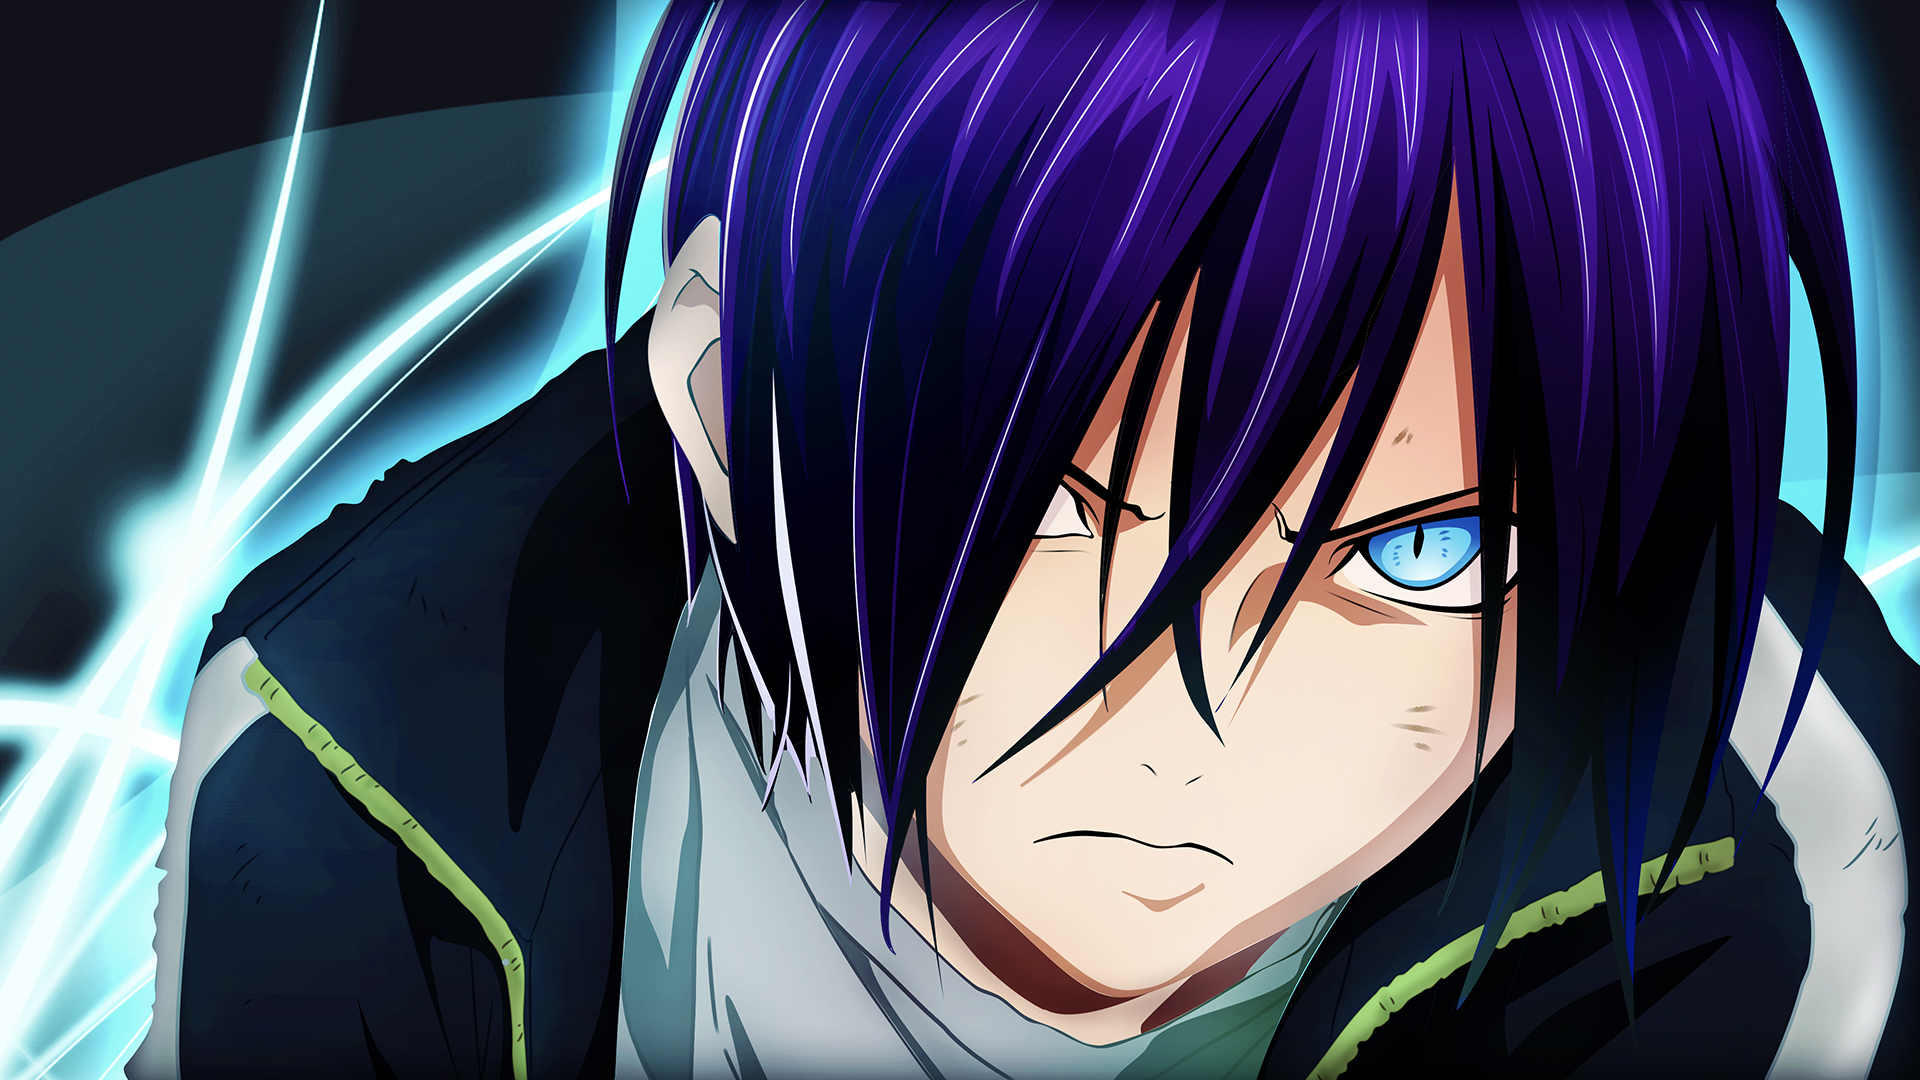 2. "Yato" from Noragami - wide 7